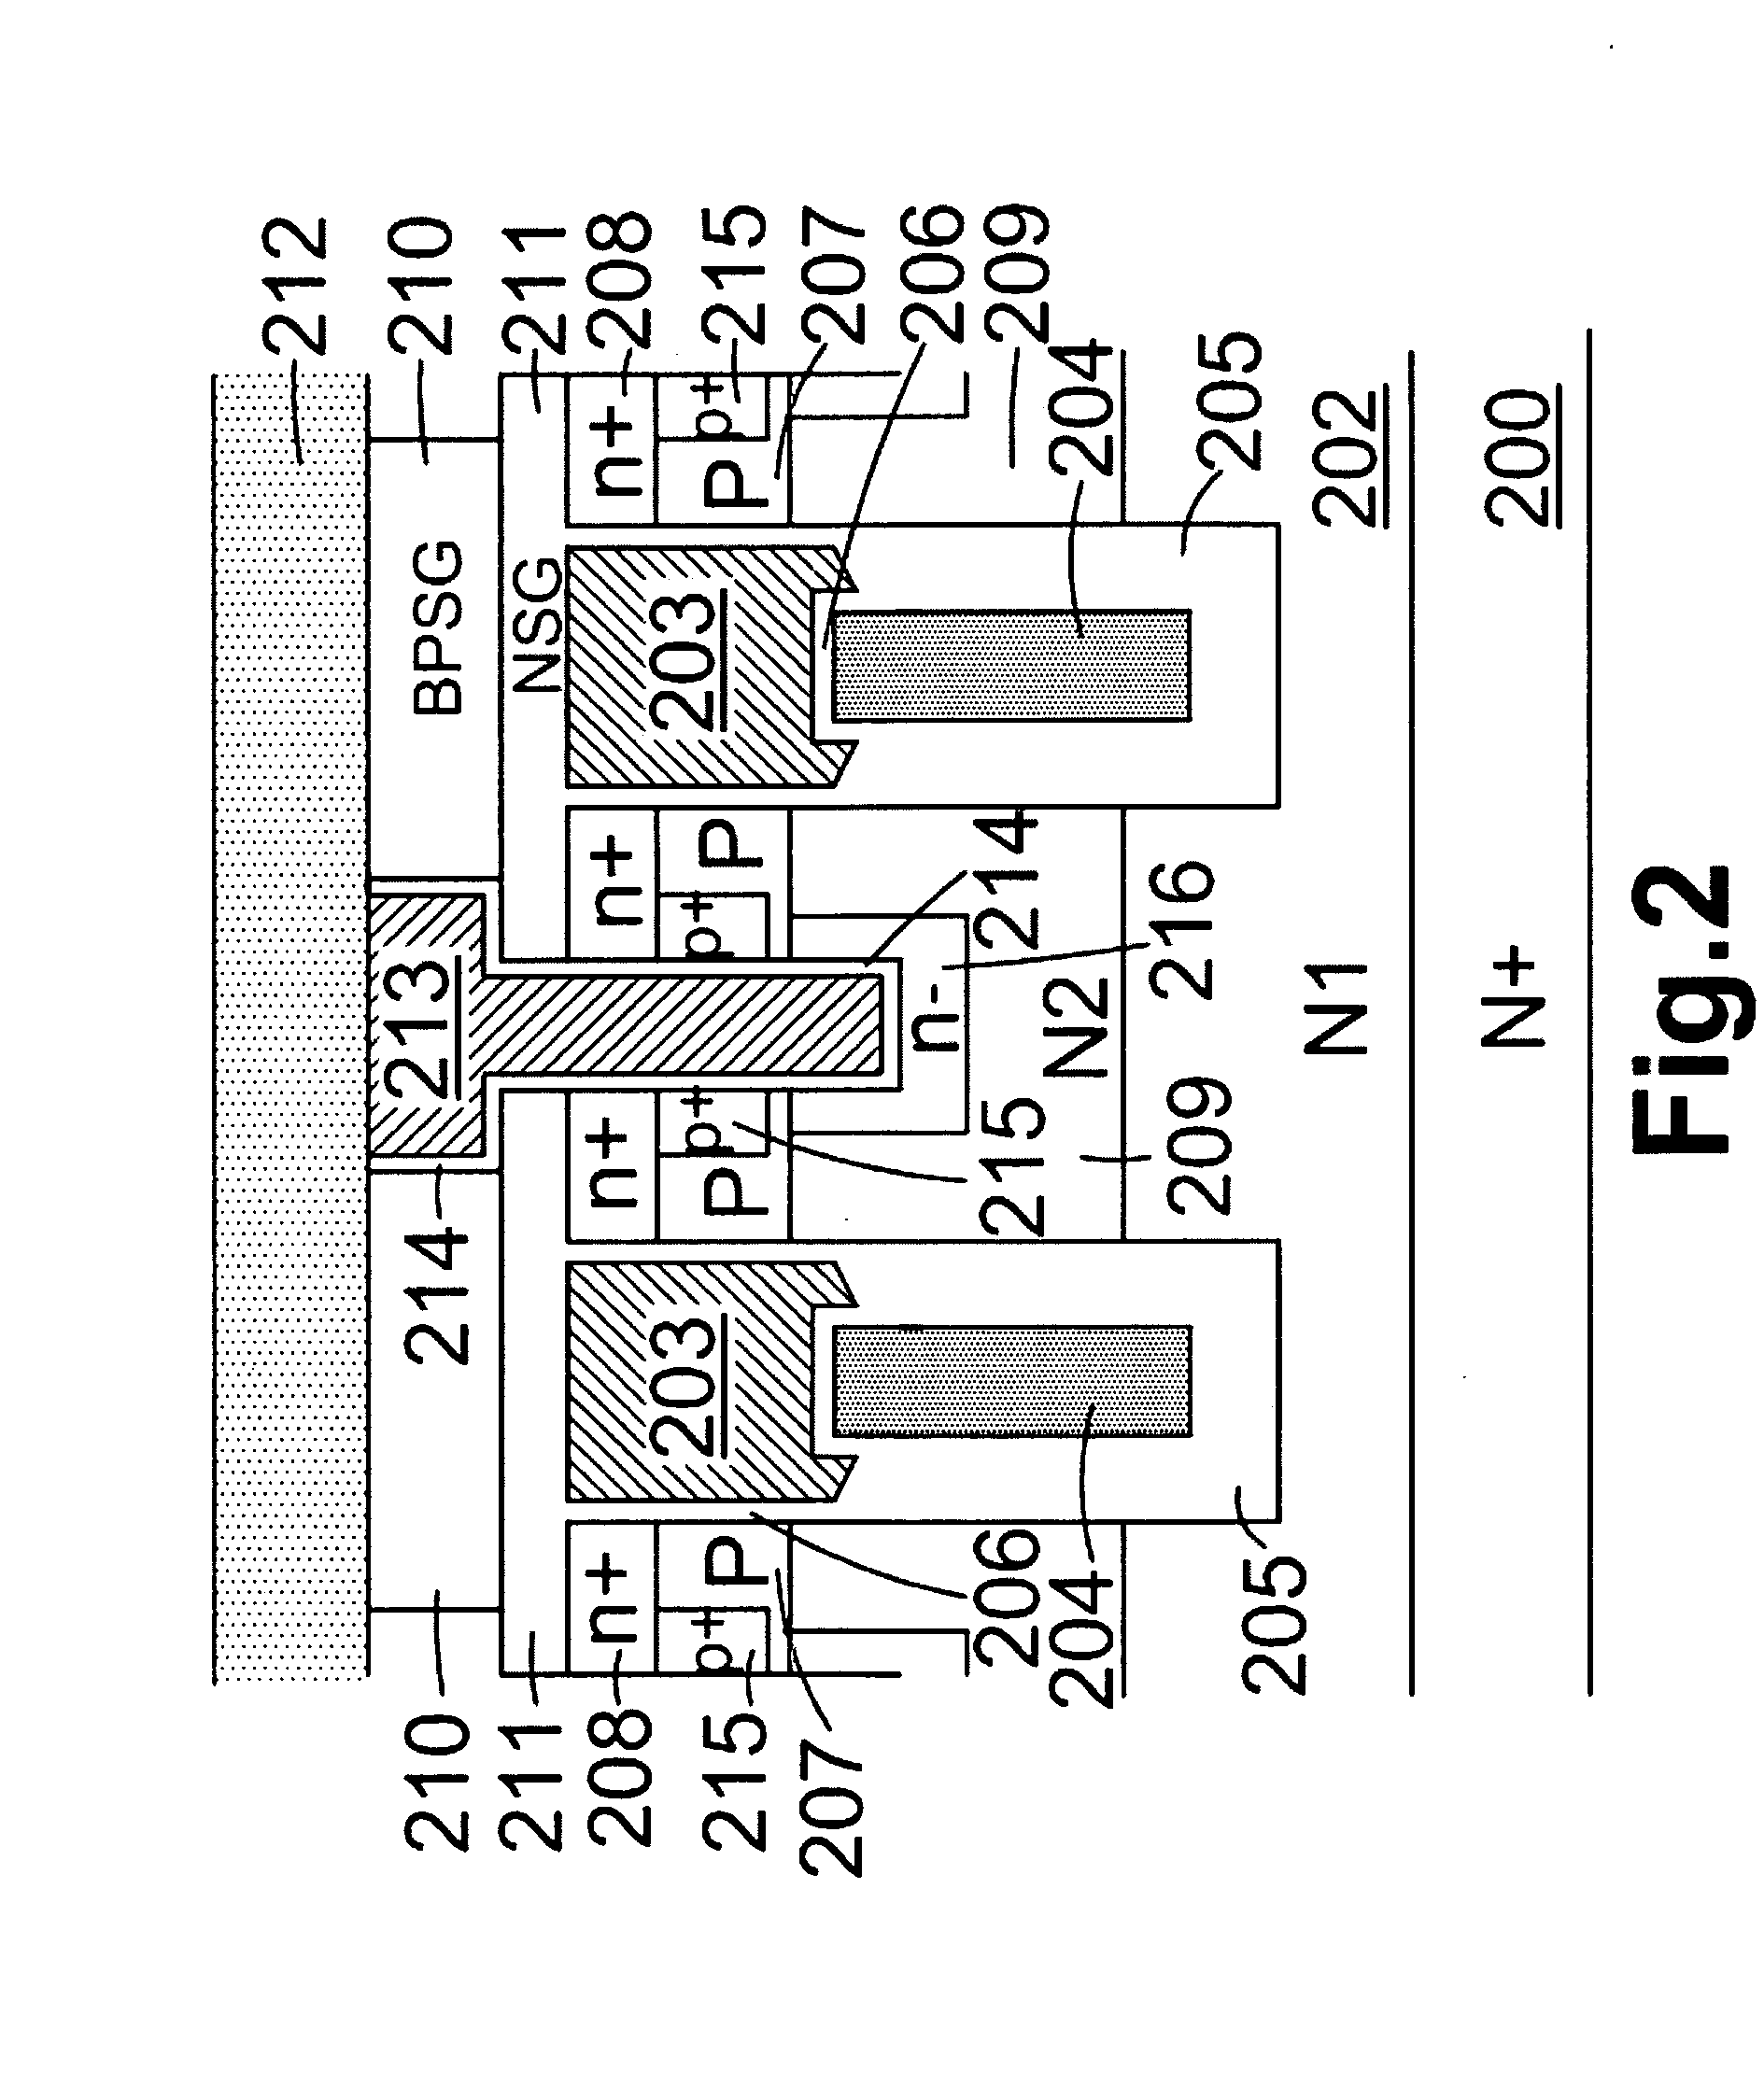 Trench mosfet with integrated schottky rectifier in same cell